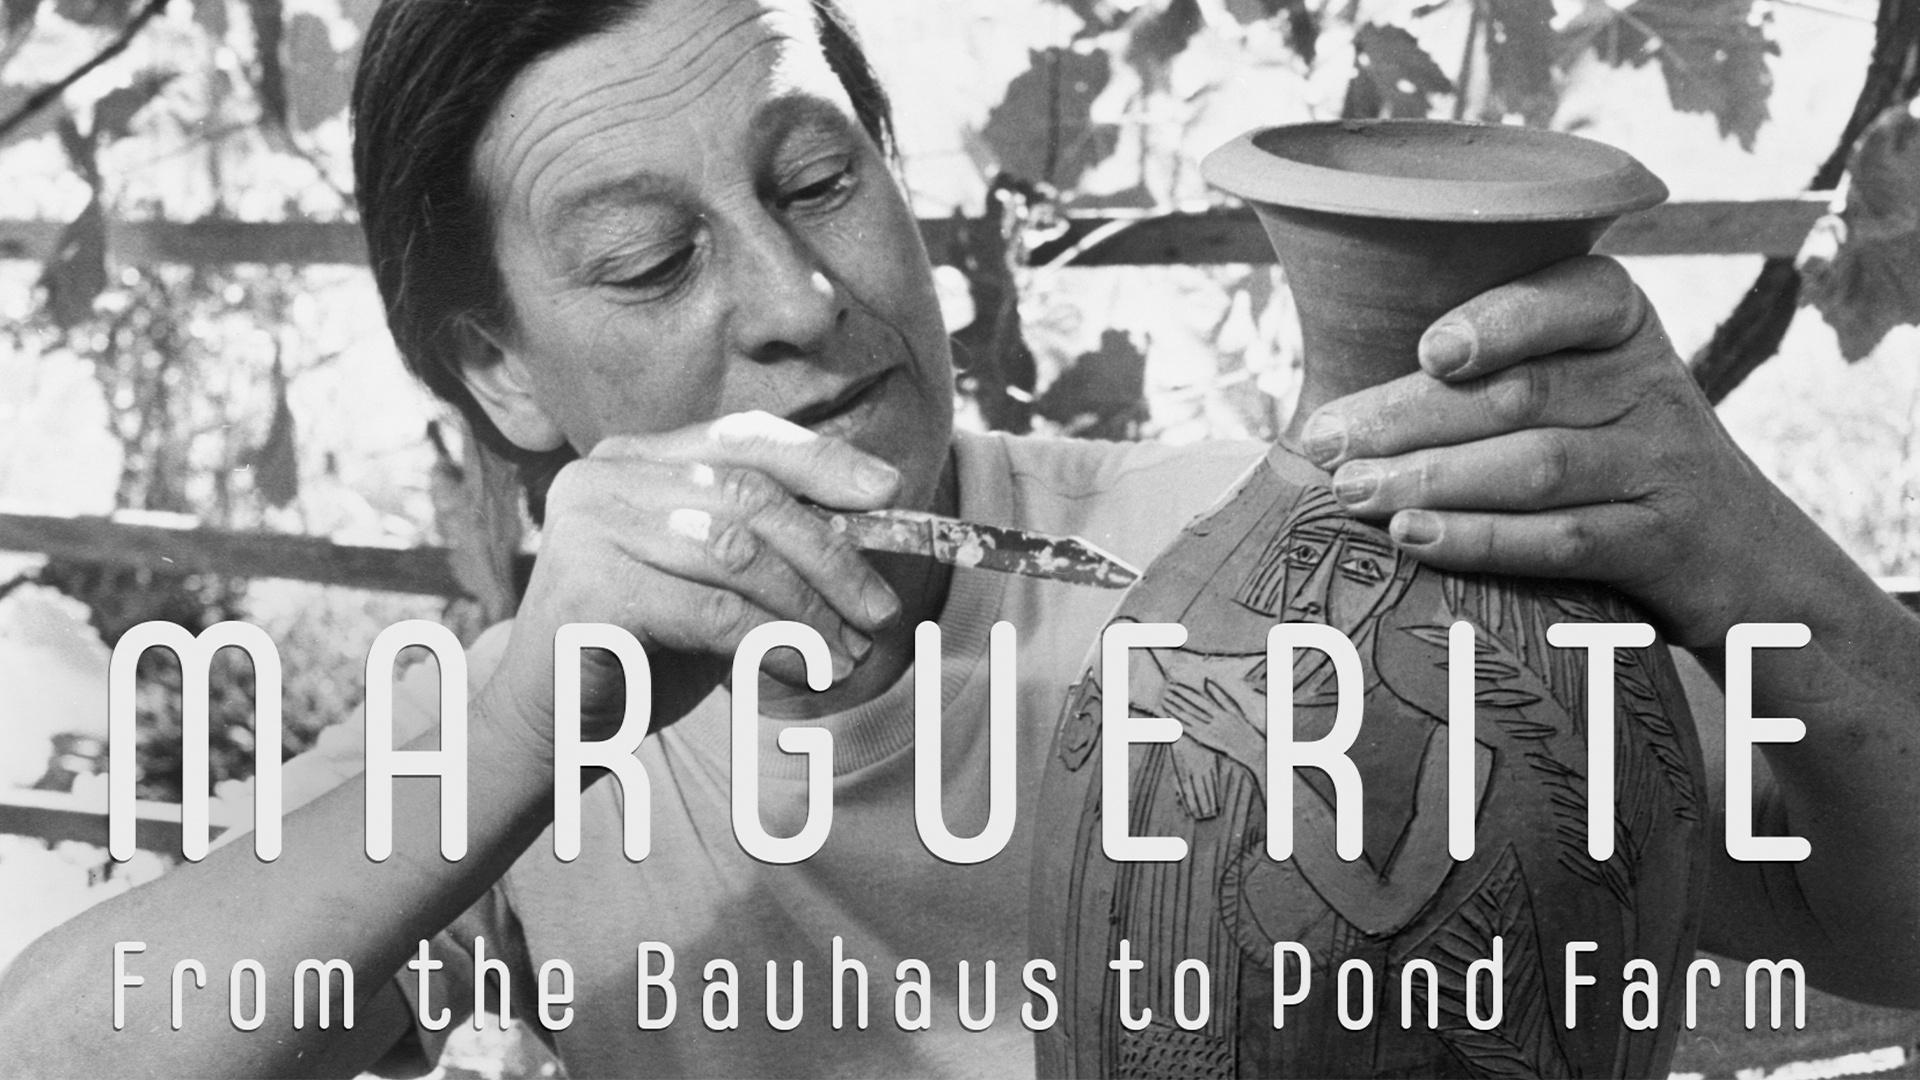 Marguerite: From the Bauhaus to Pond Farm